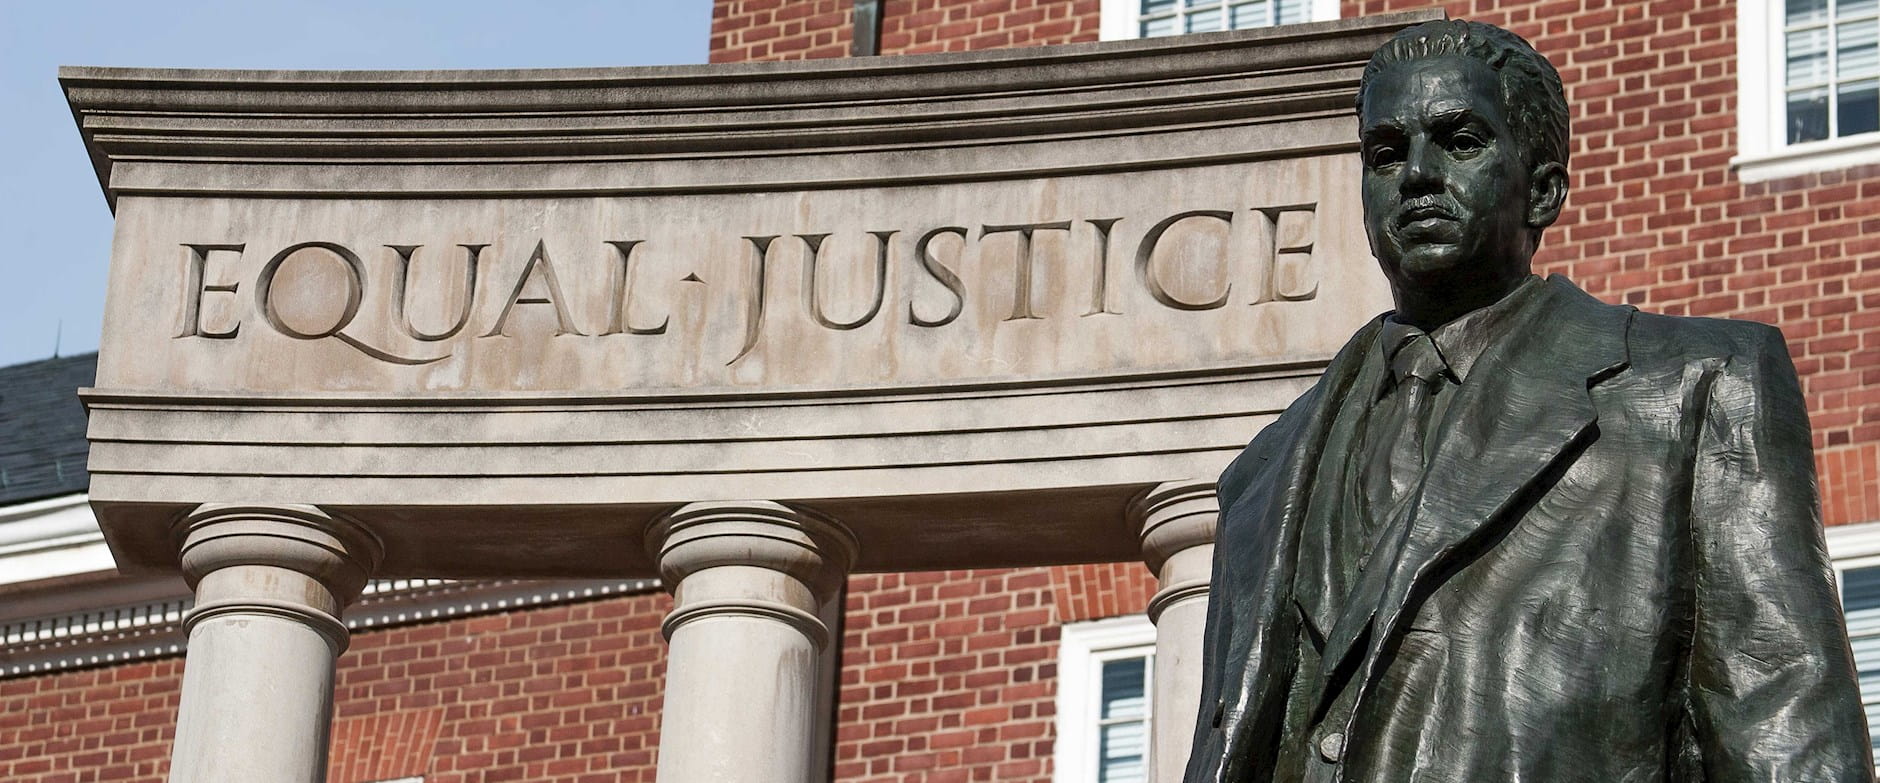 A statue of Thurgood Marshall at a memorial outside the Maryland State House - a concrete piece of the artwork reads "Equal Justice"